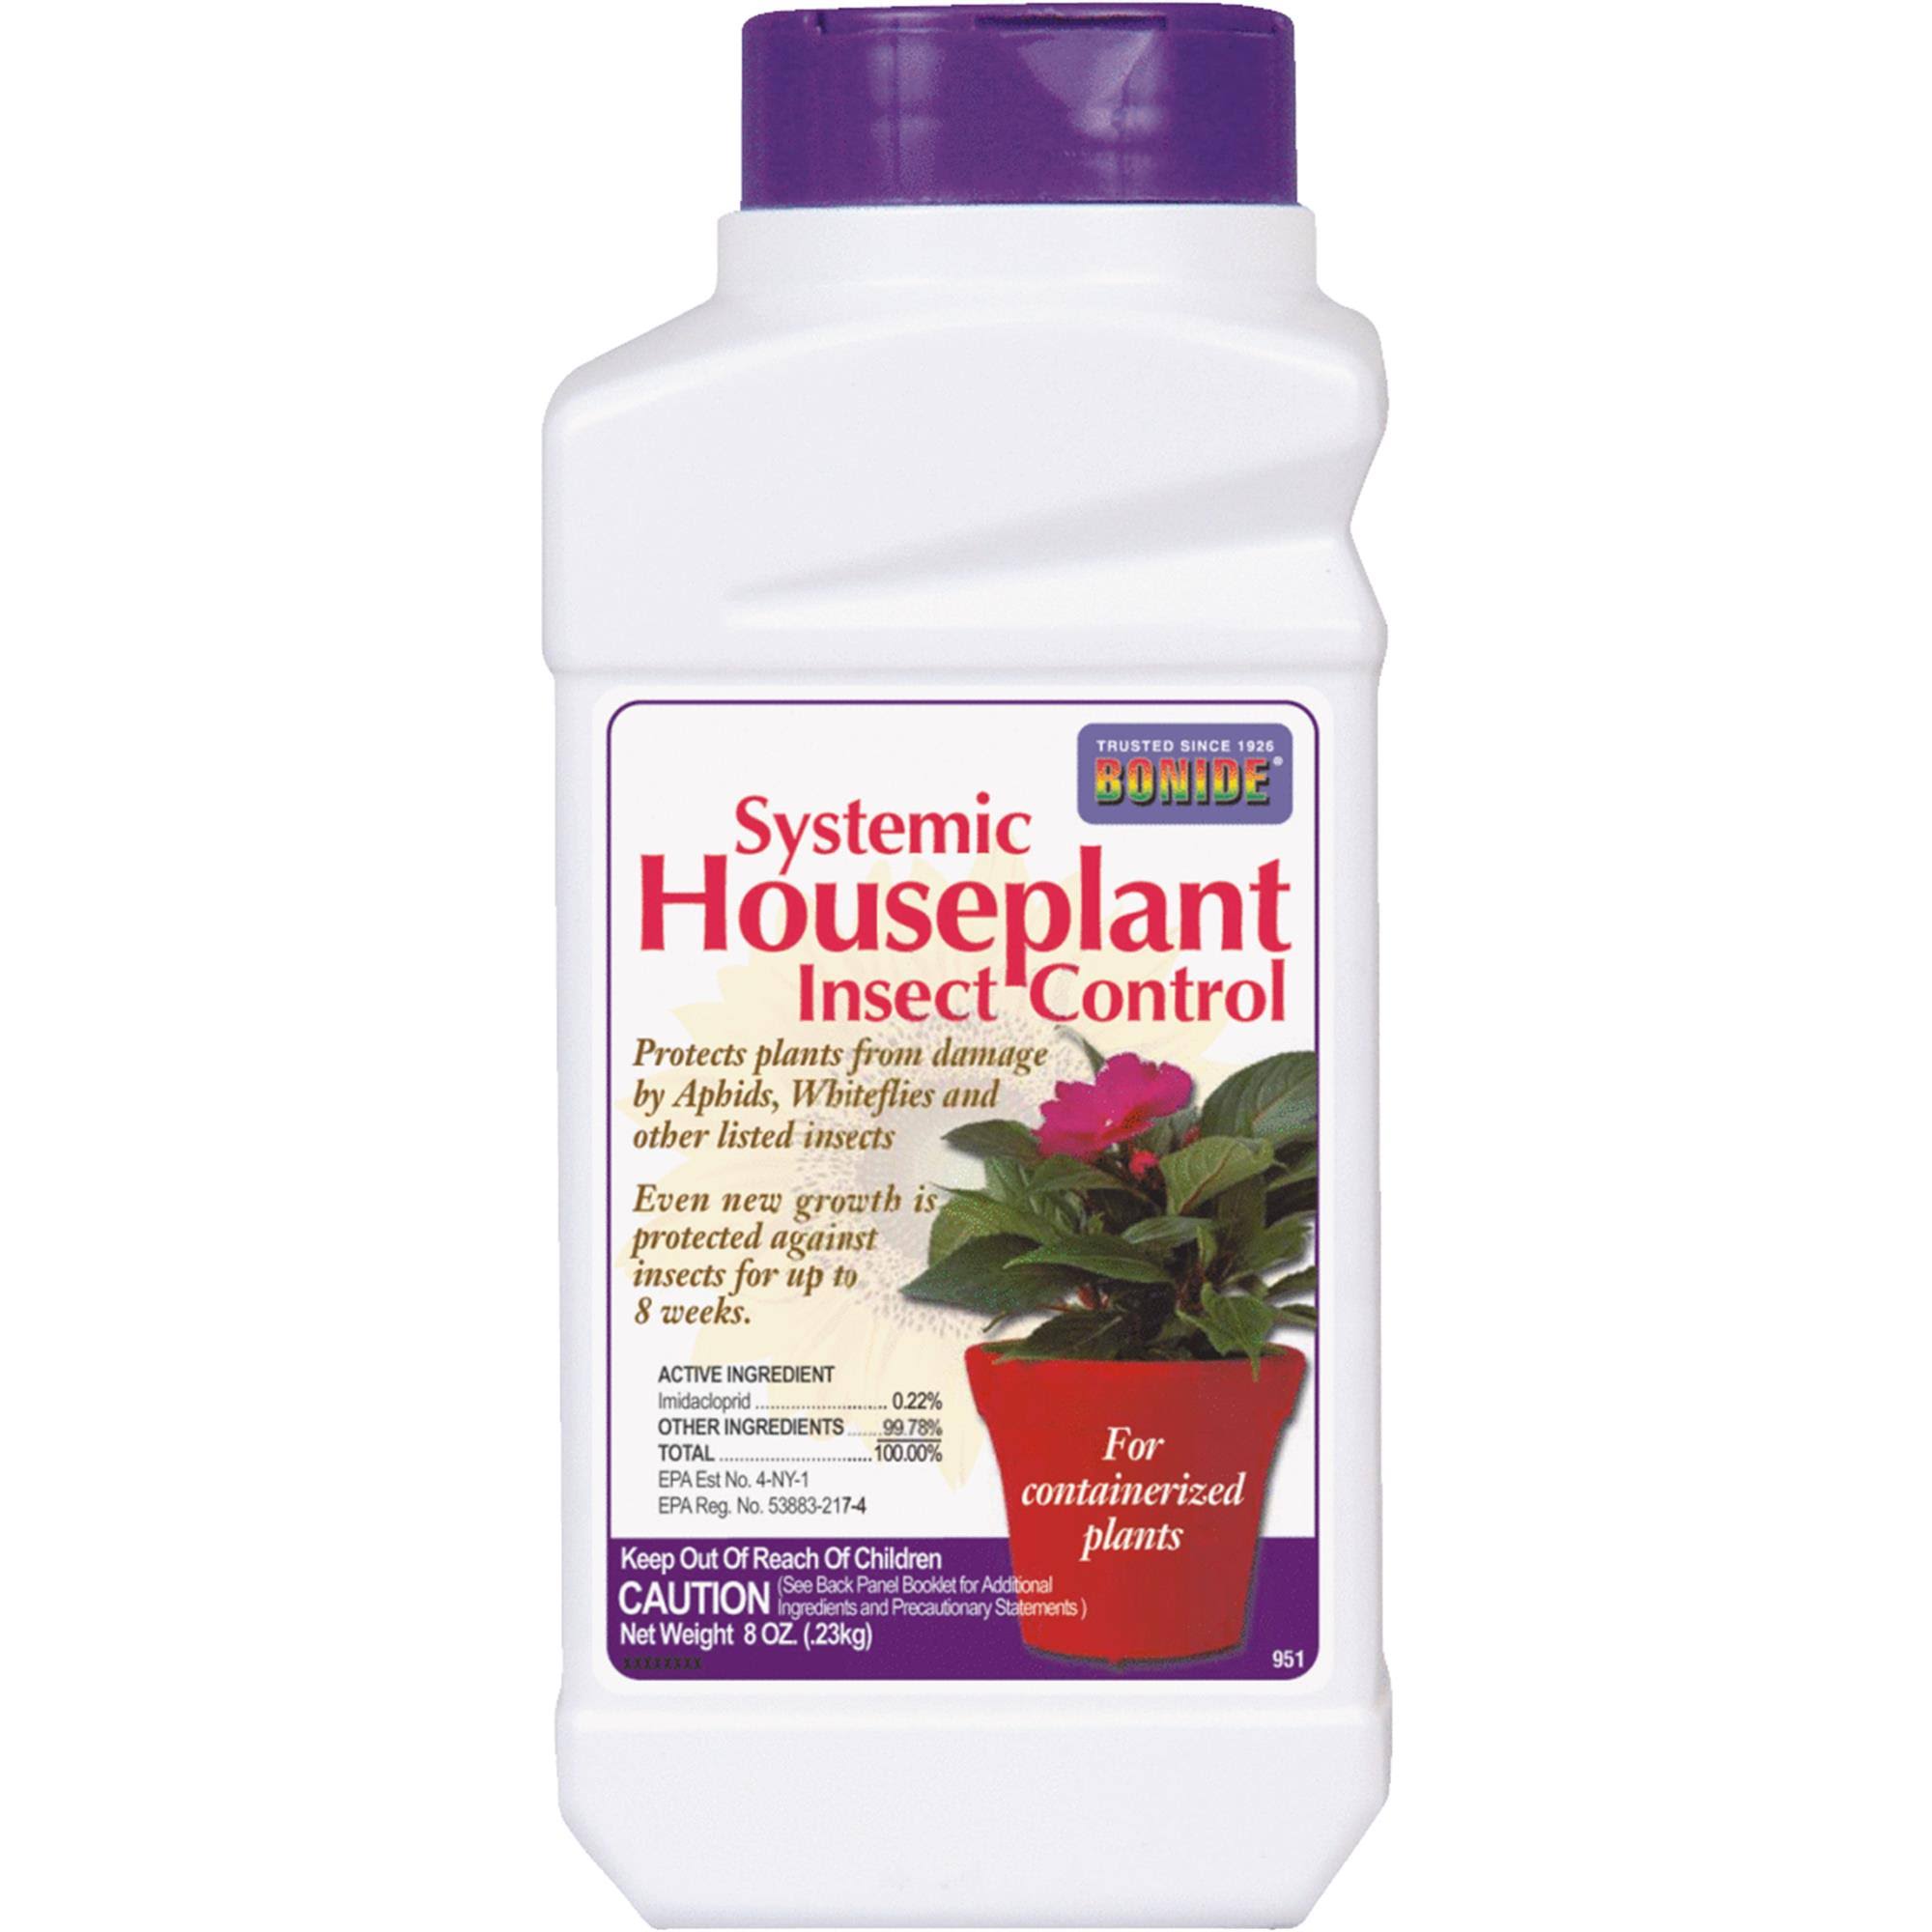 Bonide Systemic Houseplant Insect Control - 8 oz